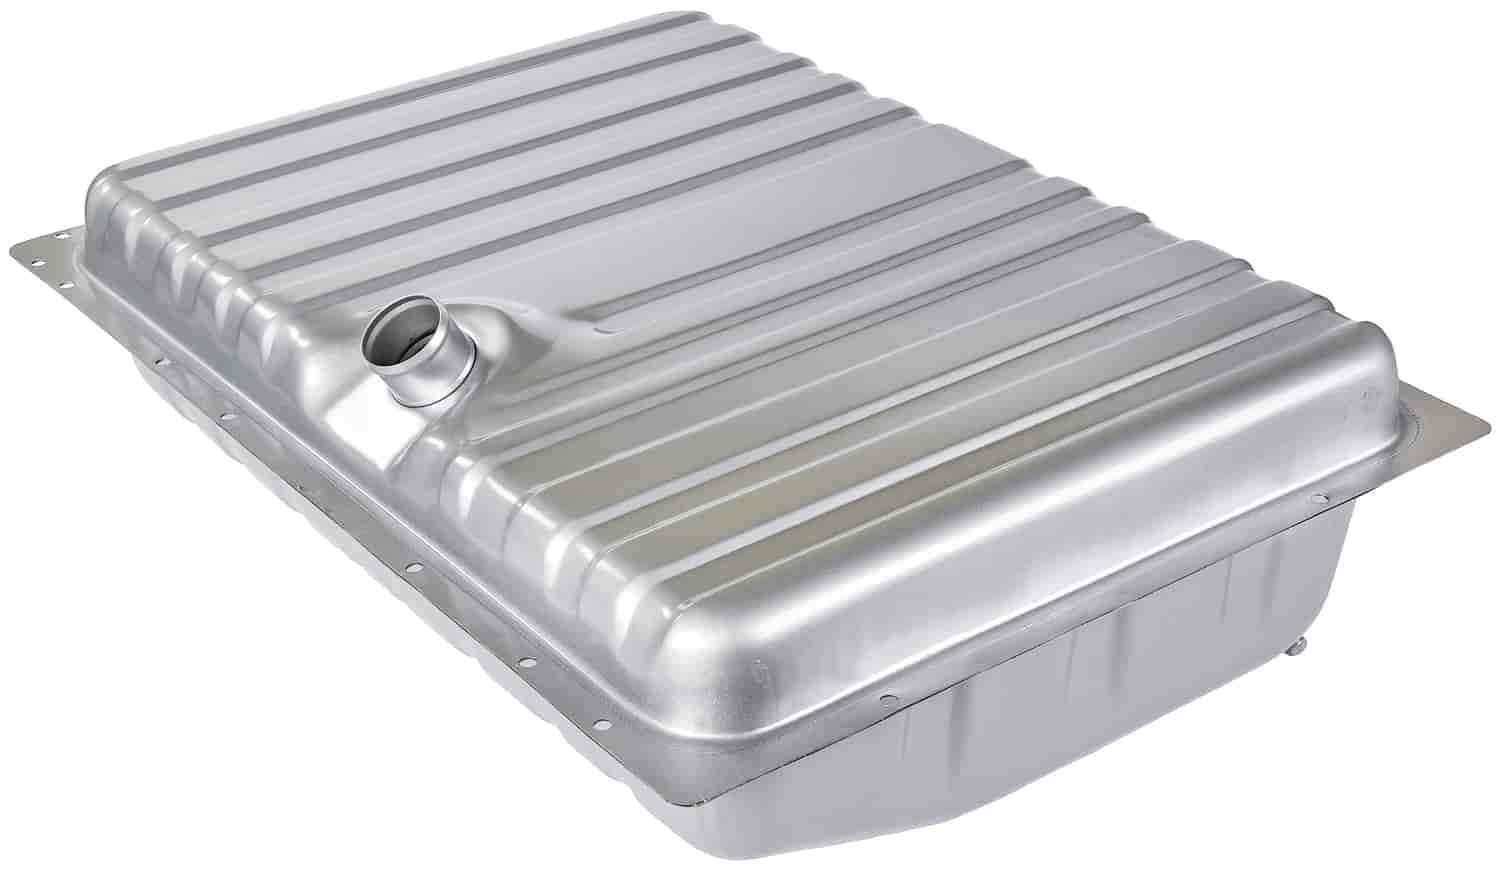 Fuel Tank for 1970 Mustang